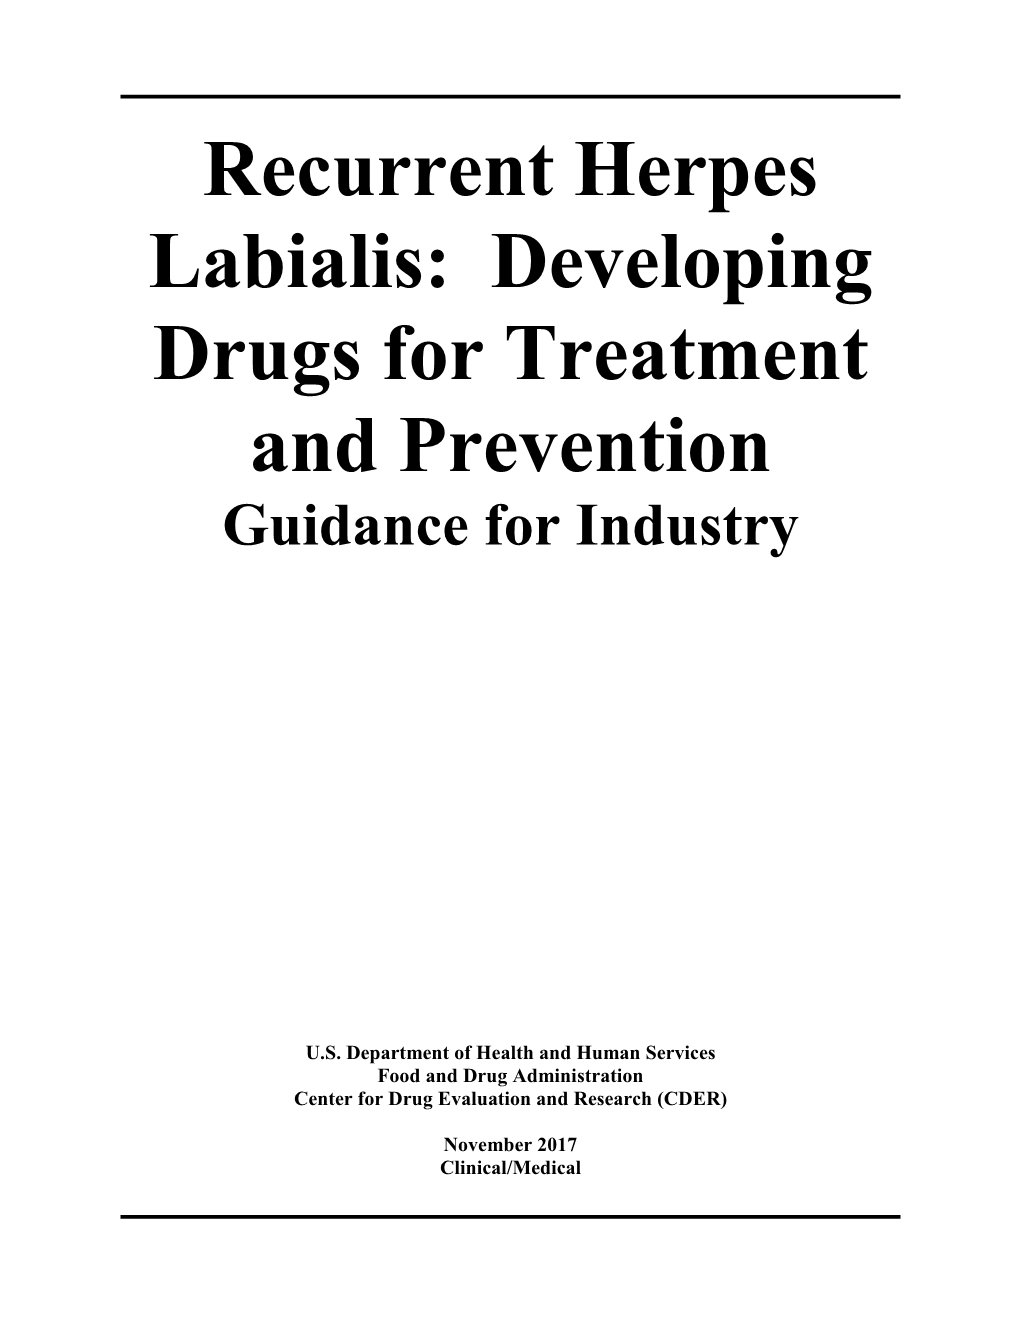 Recurrent Herpes Labialis: Developing Drugs for Treatment and Prevention Guidance for Industry